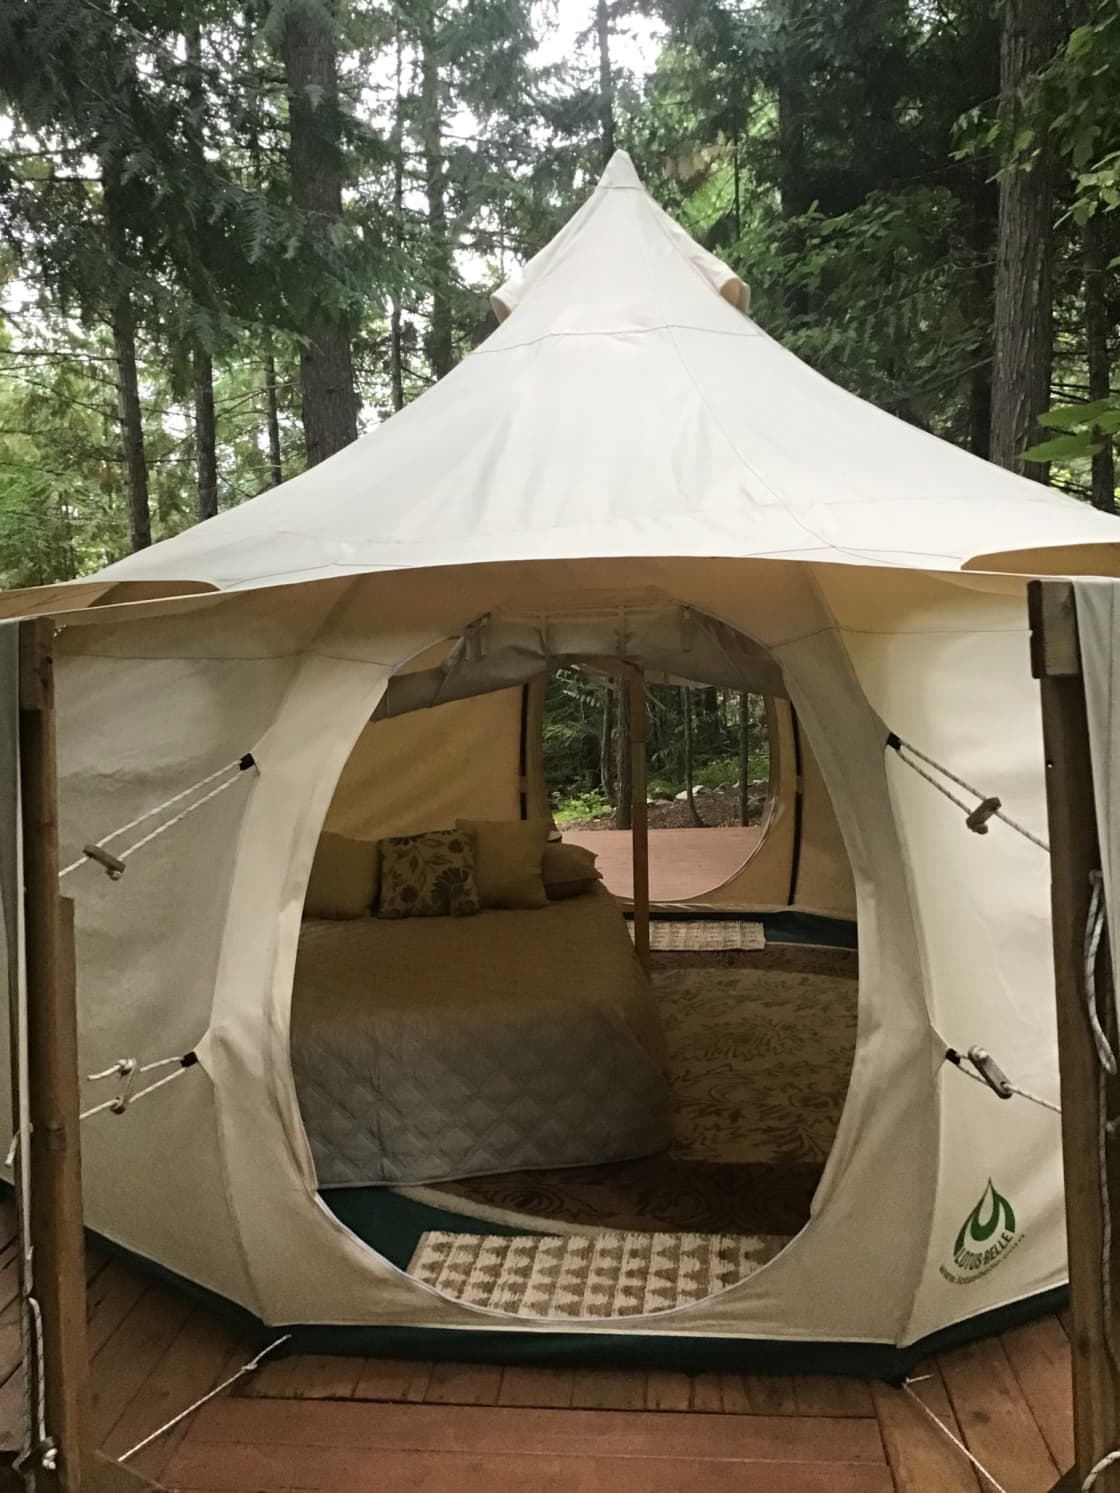 Lotus Belle tent
16 foot decagon in the forest. Queen bed with organic cotton sheets, round wool rug floor.